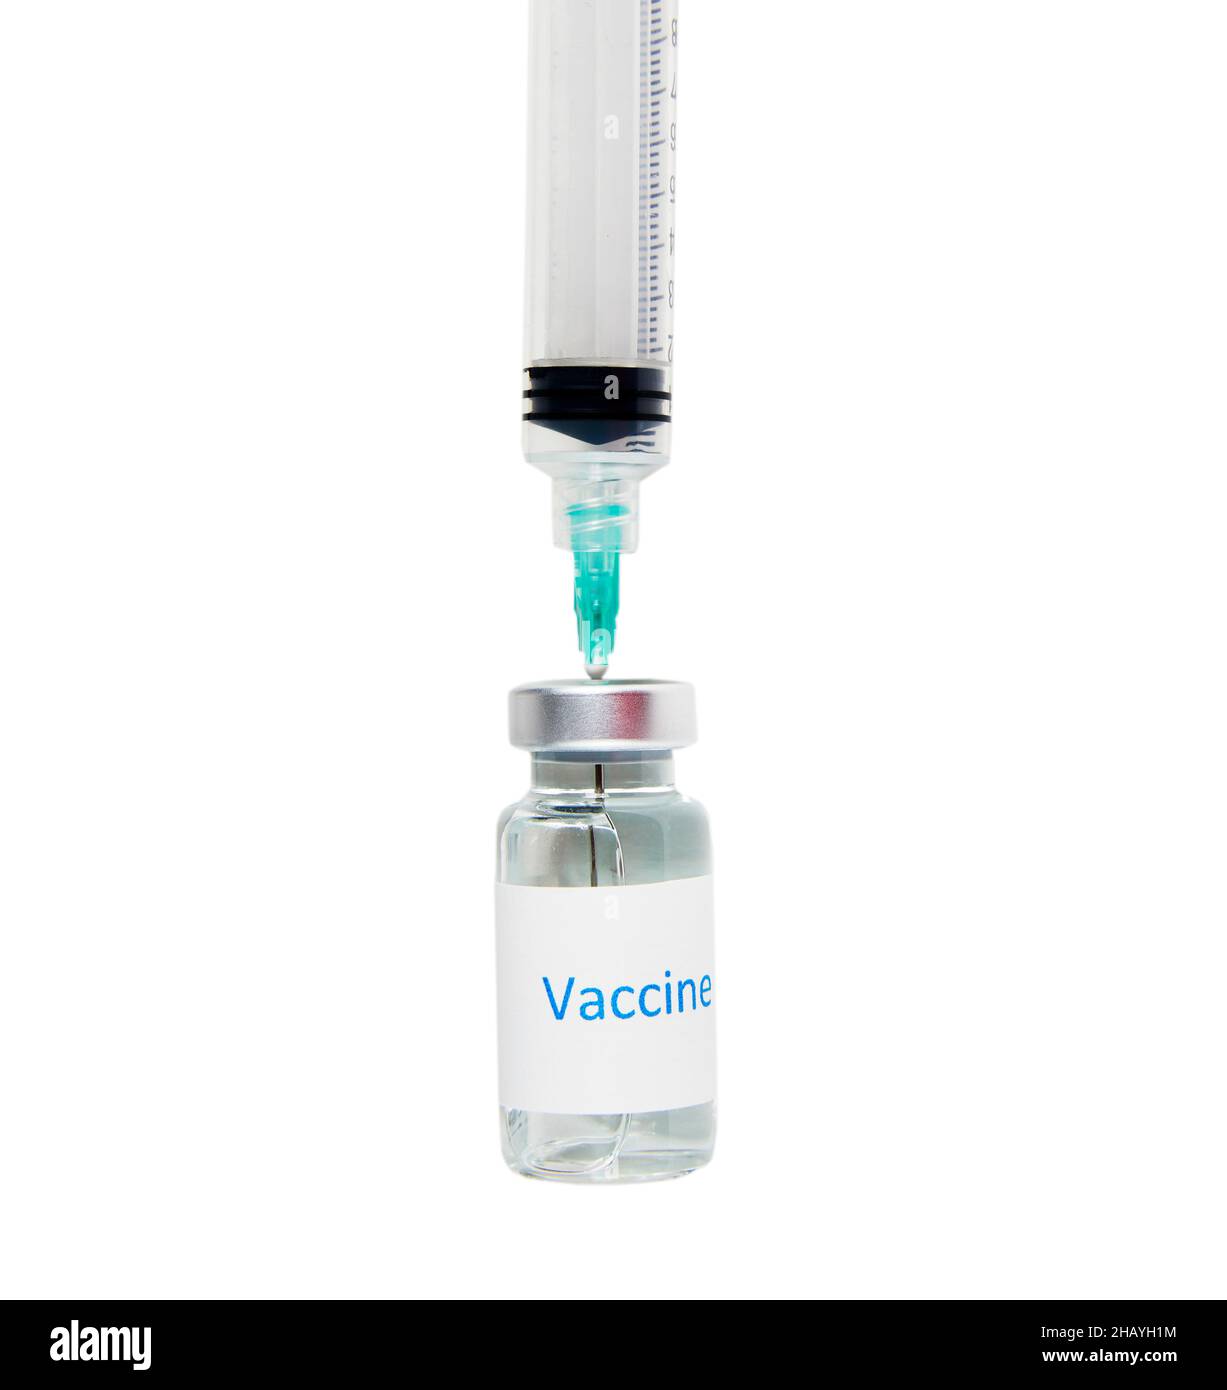 Vaccine bottle with a needle inserted into the bottle and syringe isolated on white Stock Photo